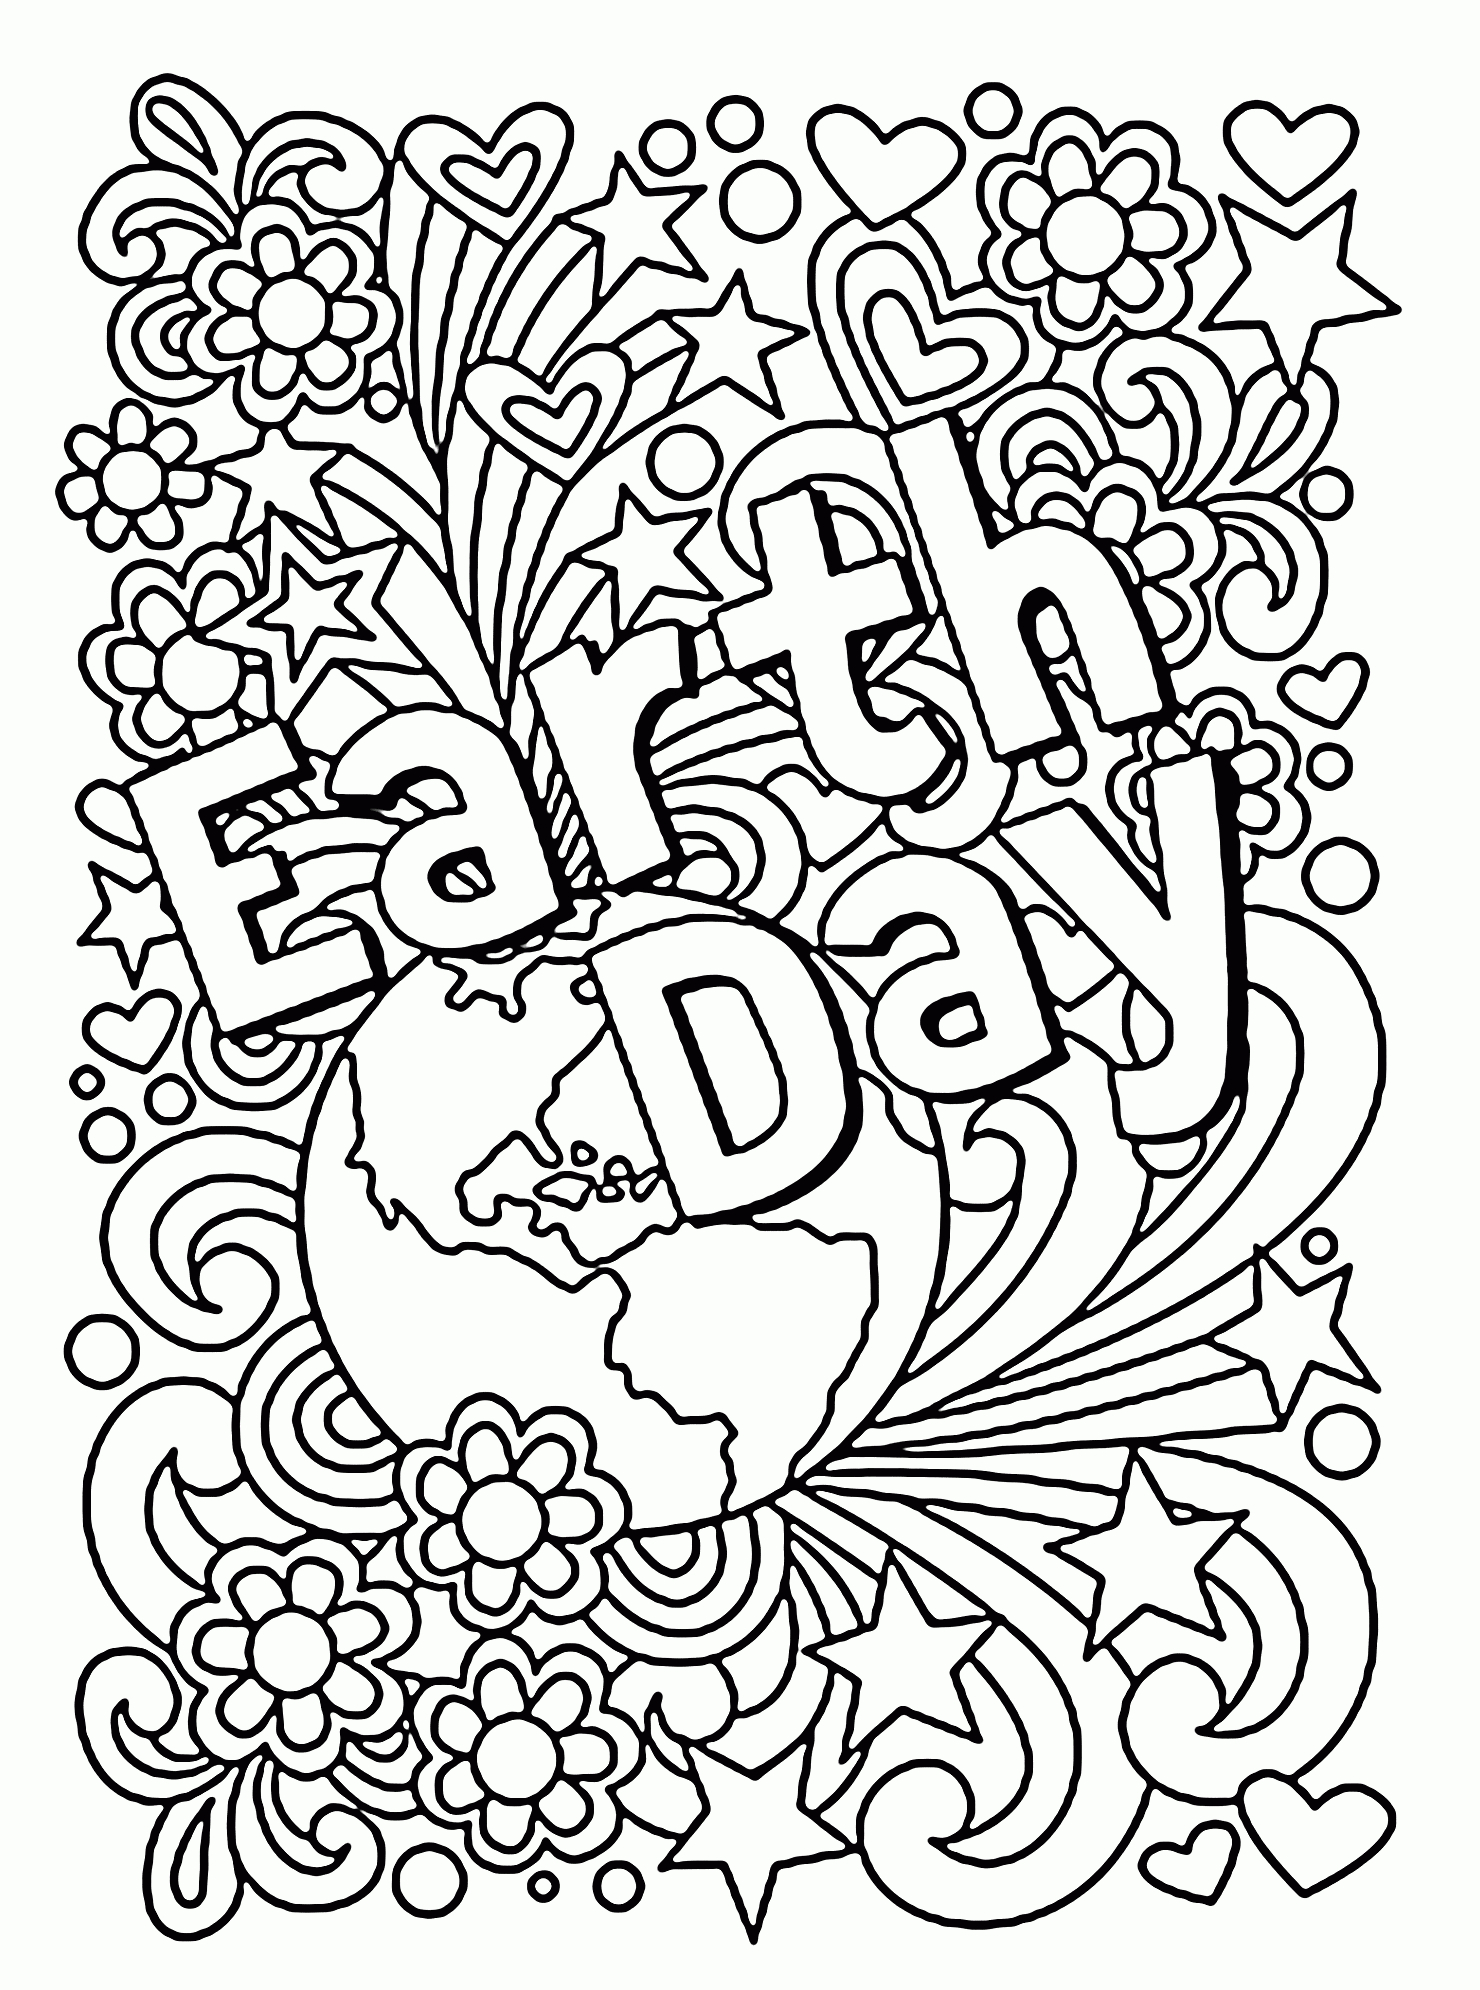 Celebration Earth Day Coloring Page For Kids, Coloring Pages - Free Printable Earth Pictures